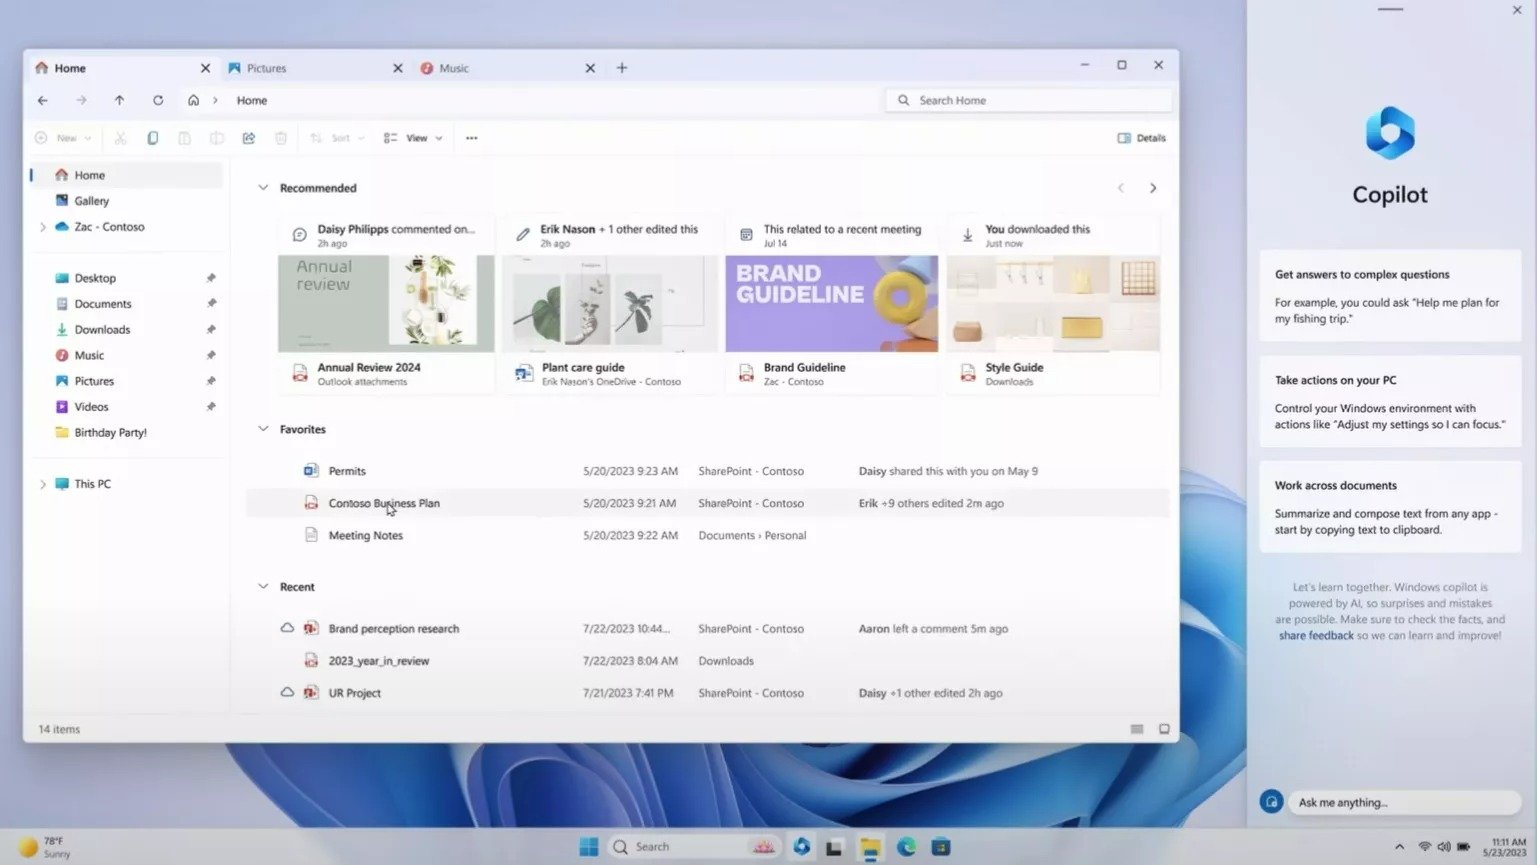 Microsoft talked about a major update of the "Explorer" in Windows 11